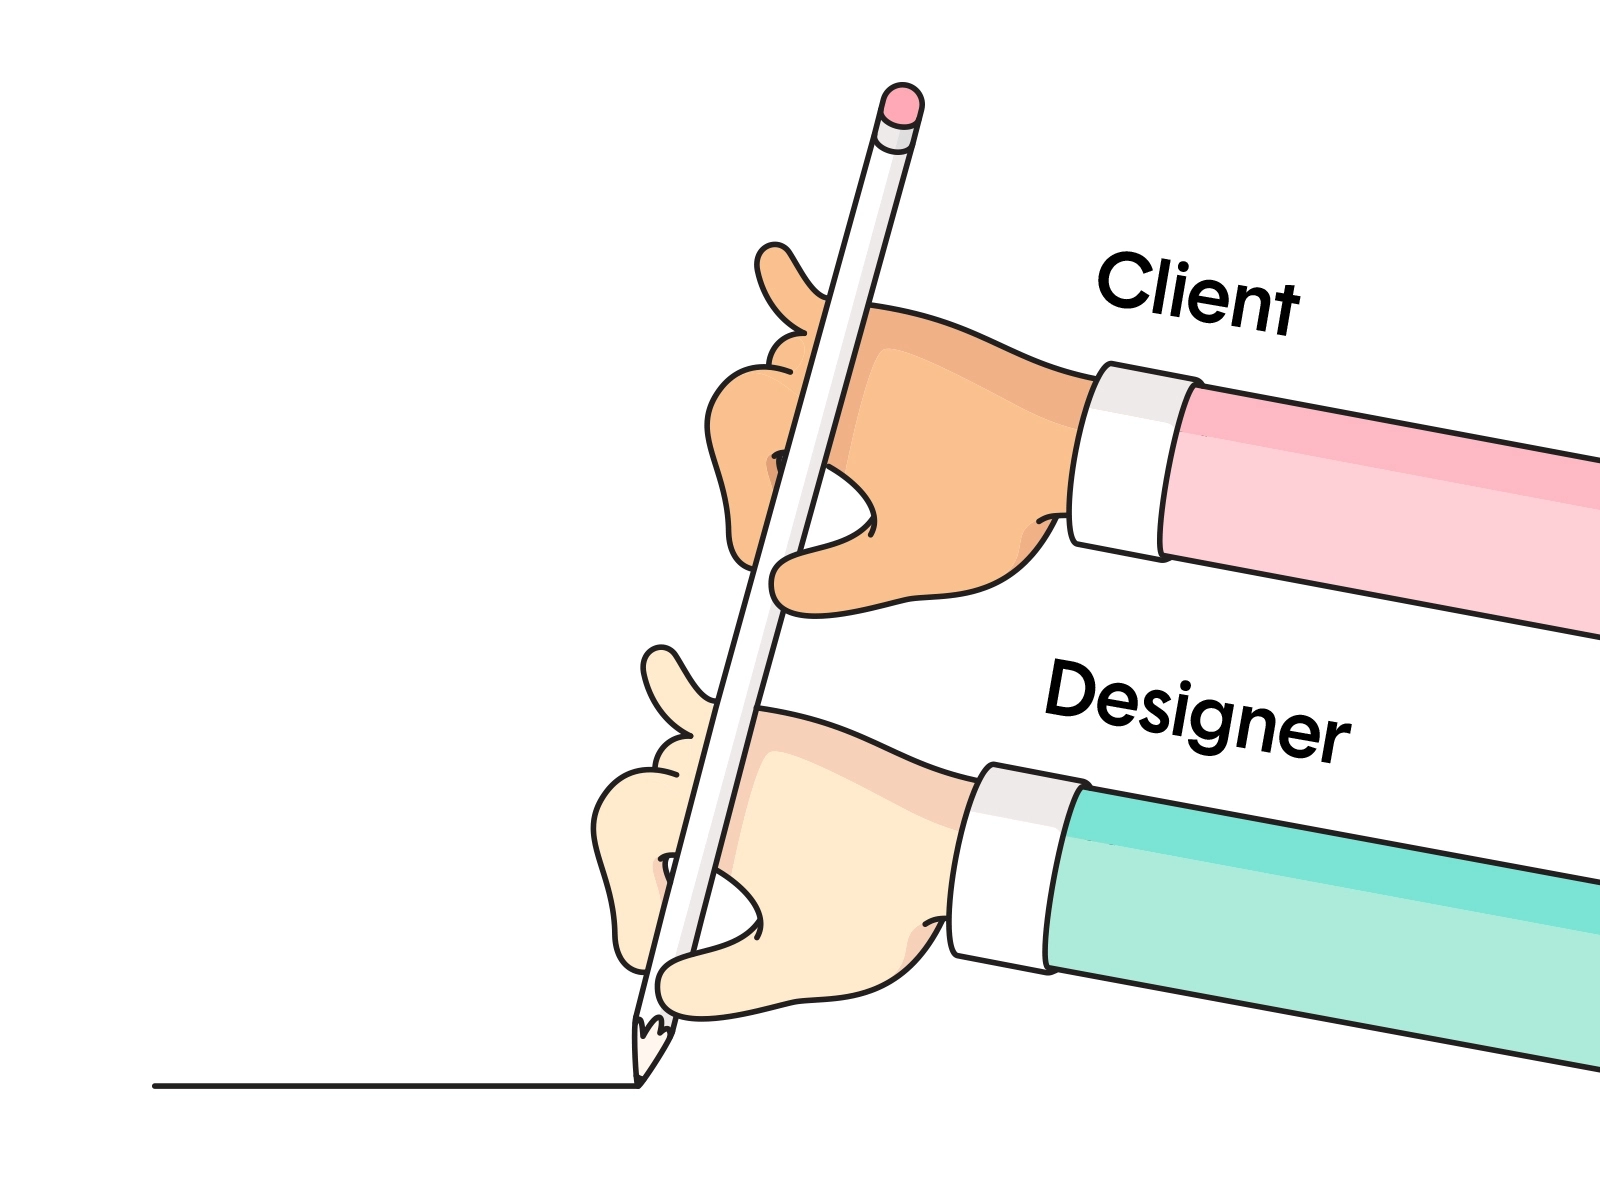 20 Designer Client Memes Every Designer Would Relate To!